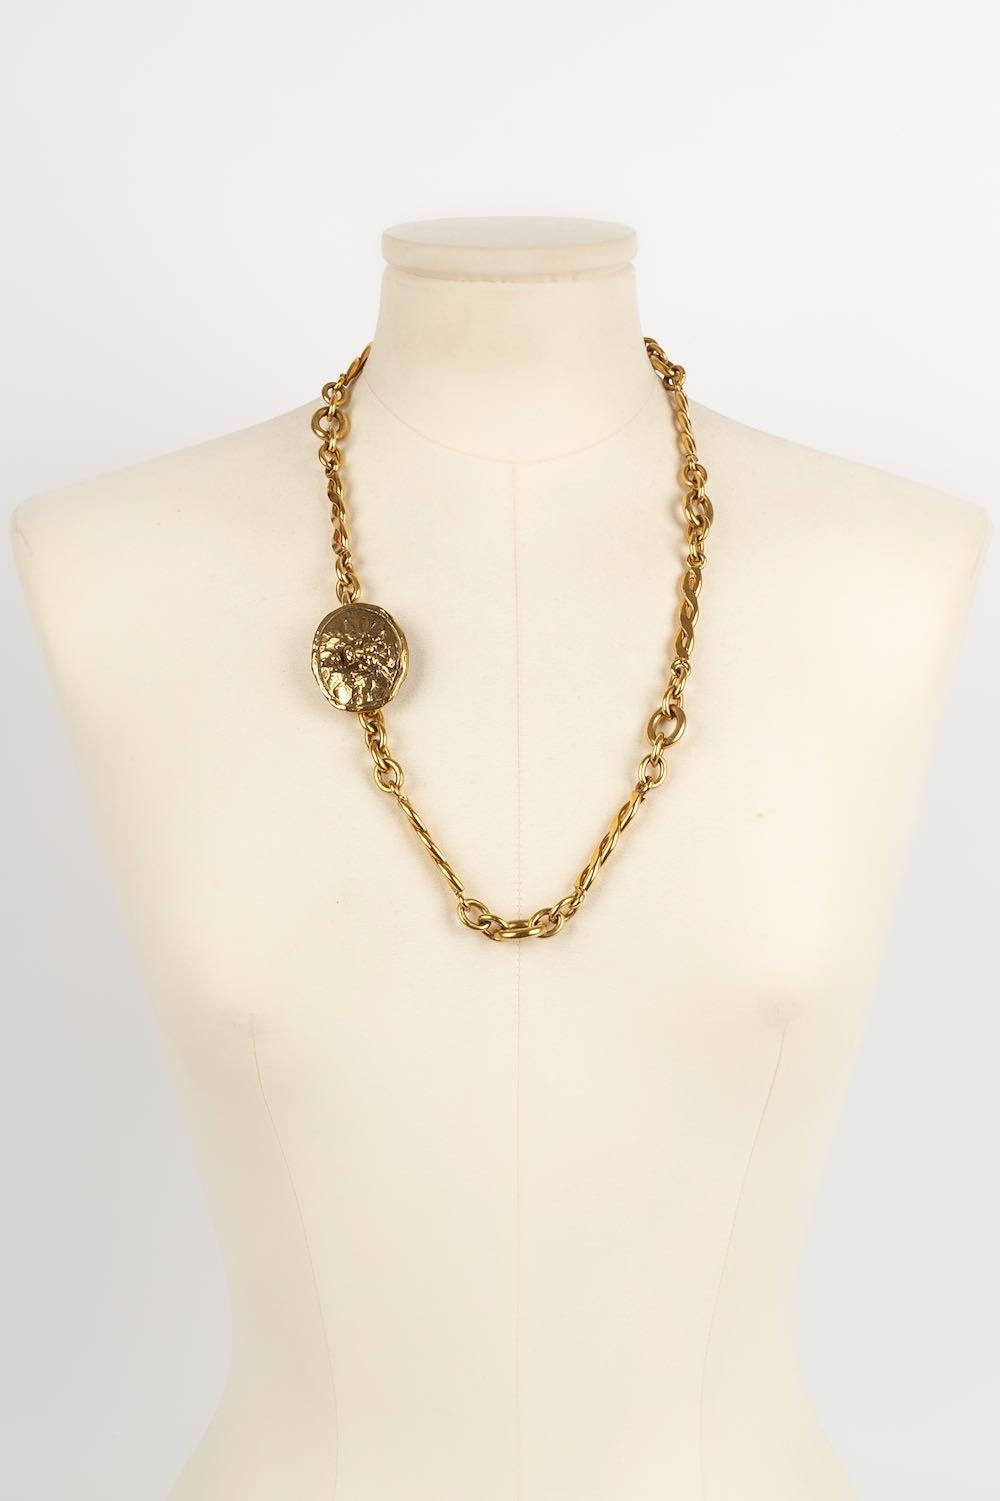 Chanel -Golden metal chain necklace with lion head clasp.

Additional information: 
Dimensions: Length: 65 cm
Condition: Very good condition
Seller Ref number: CB96